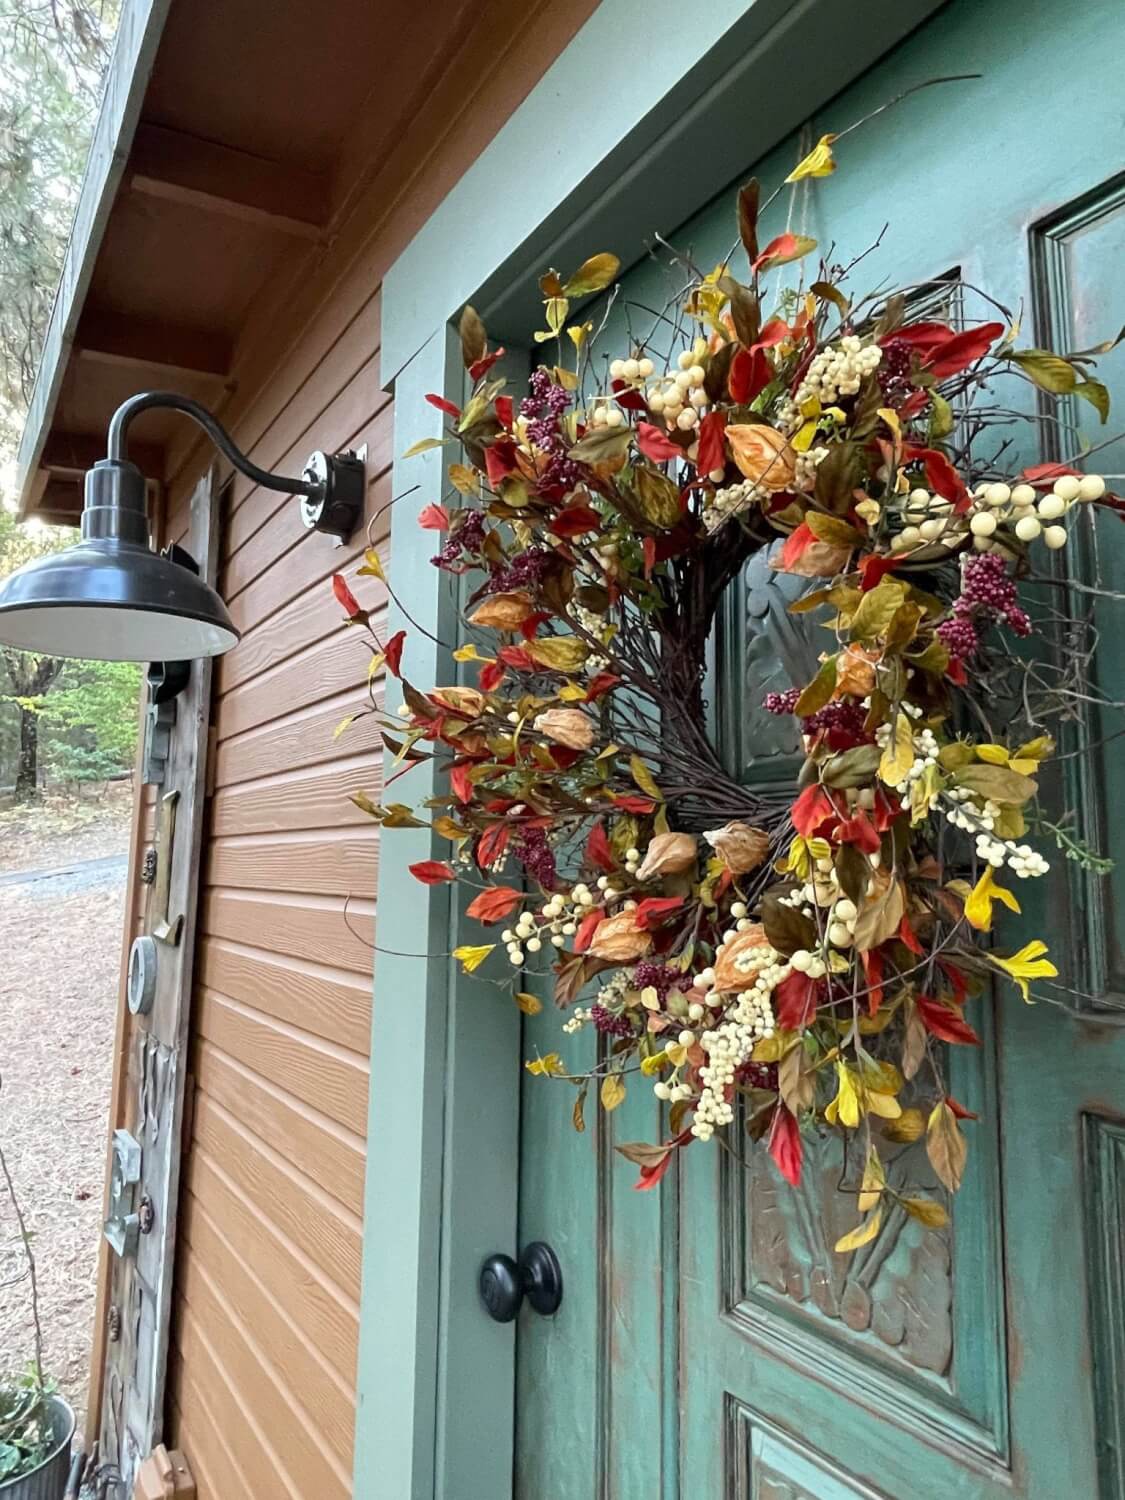 Small Barn Sconce Next to Fall Decoration on Exterior of Chicken Coop